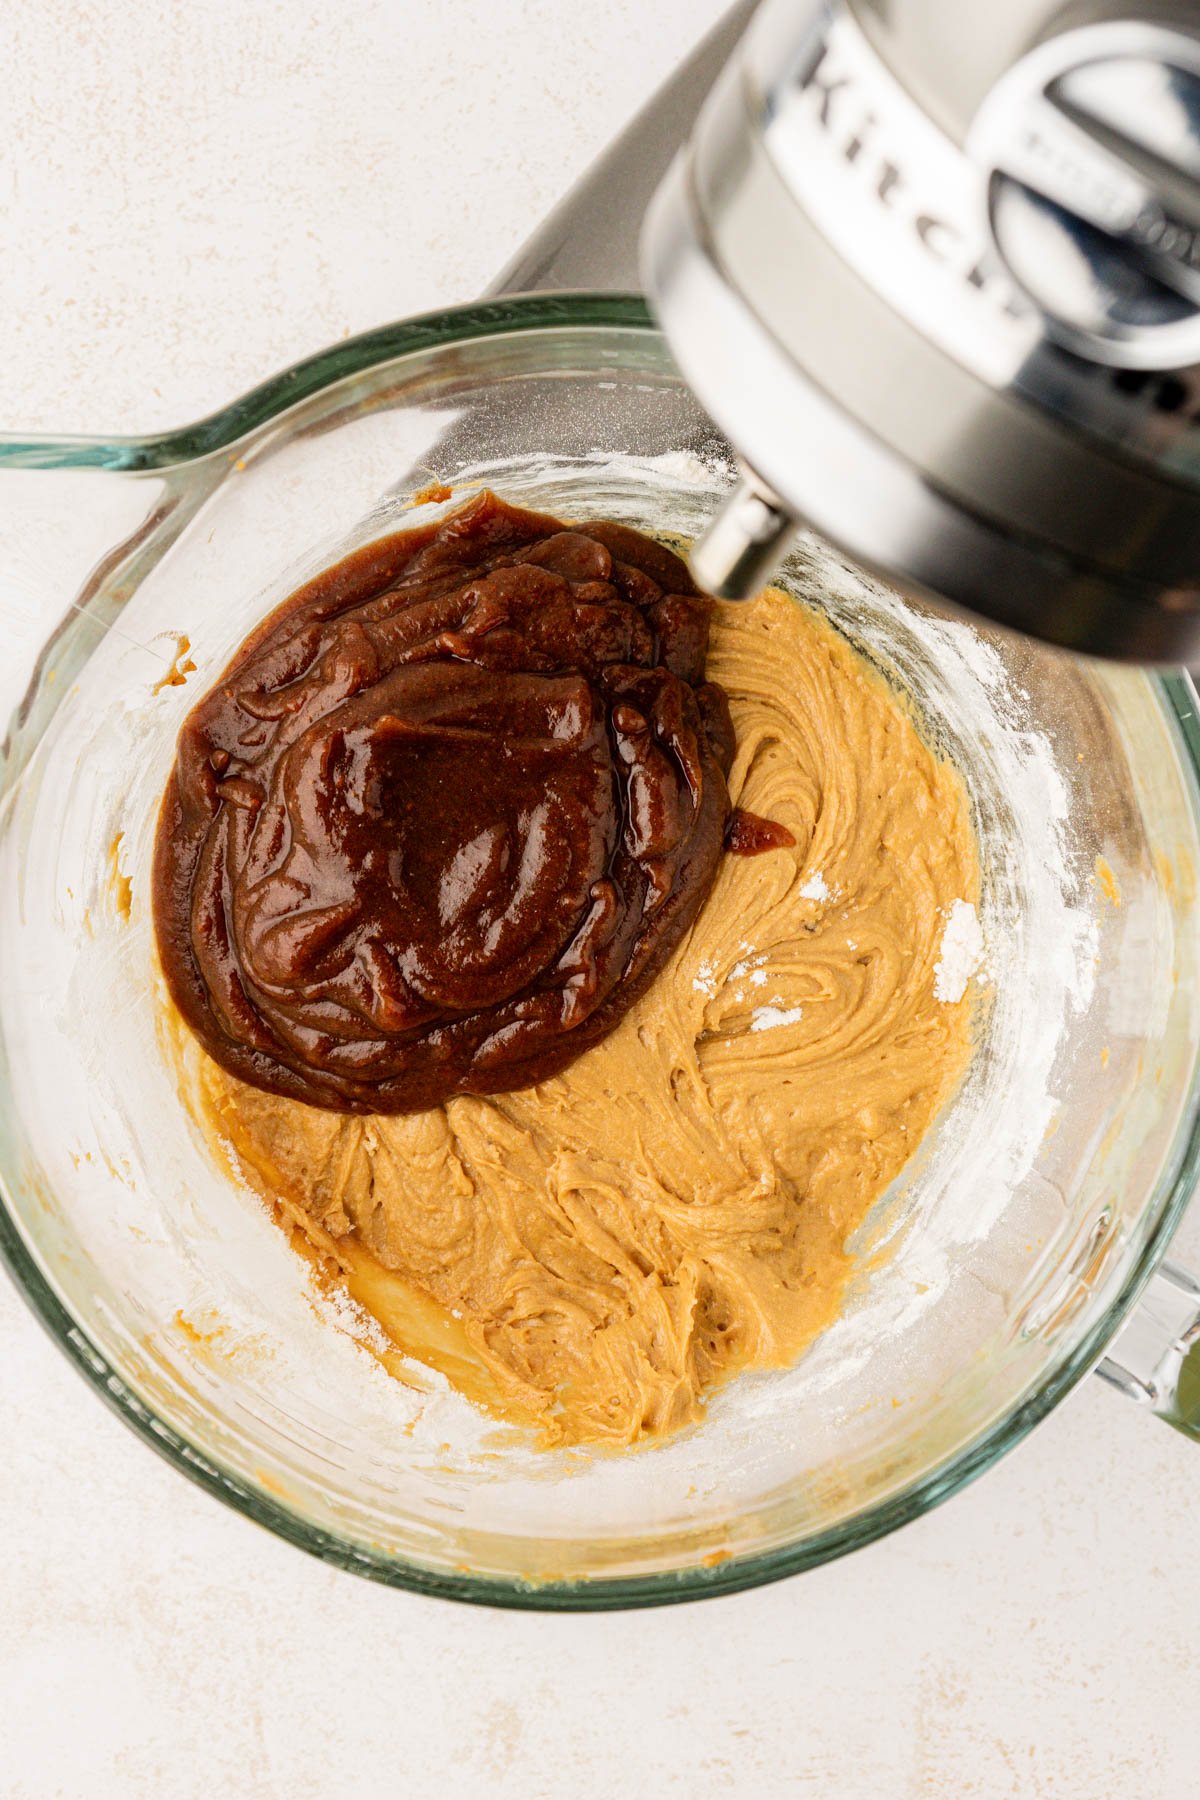 Date puree being added to batter in a glass mixing bowl.